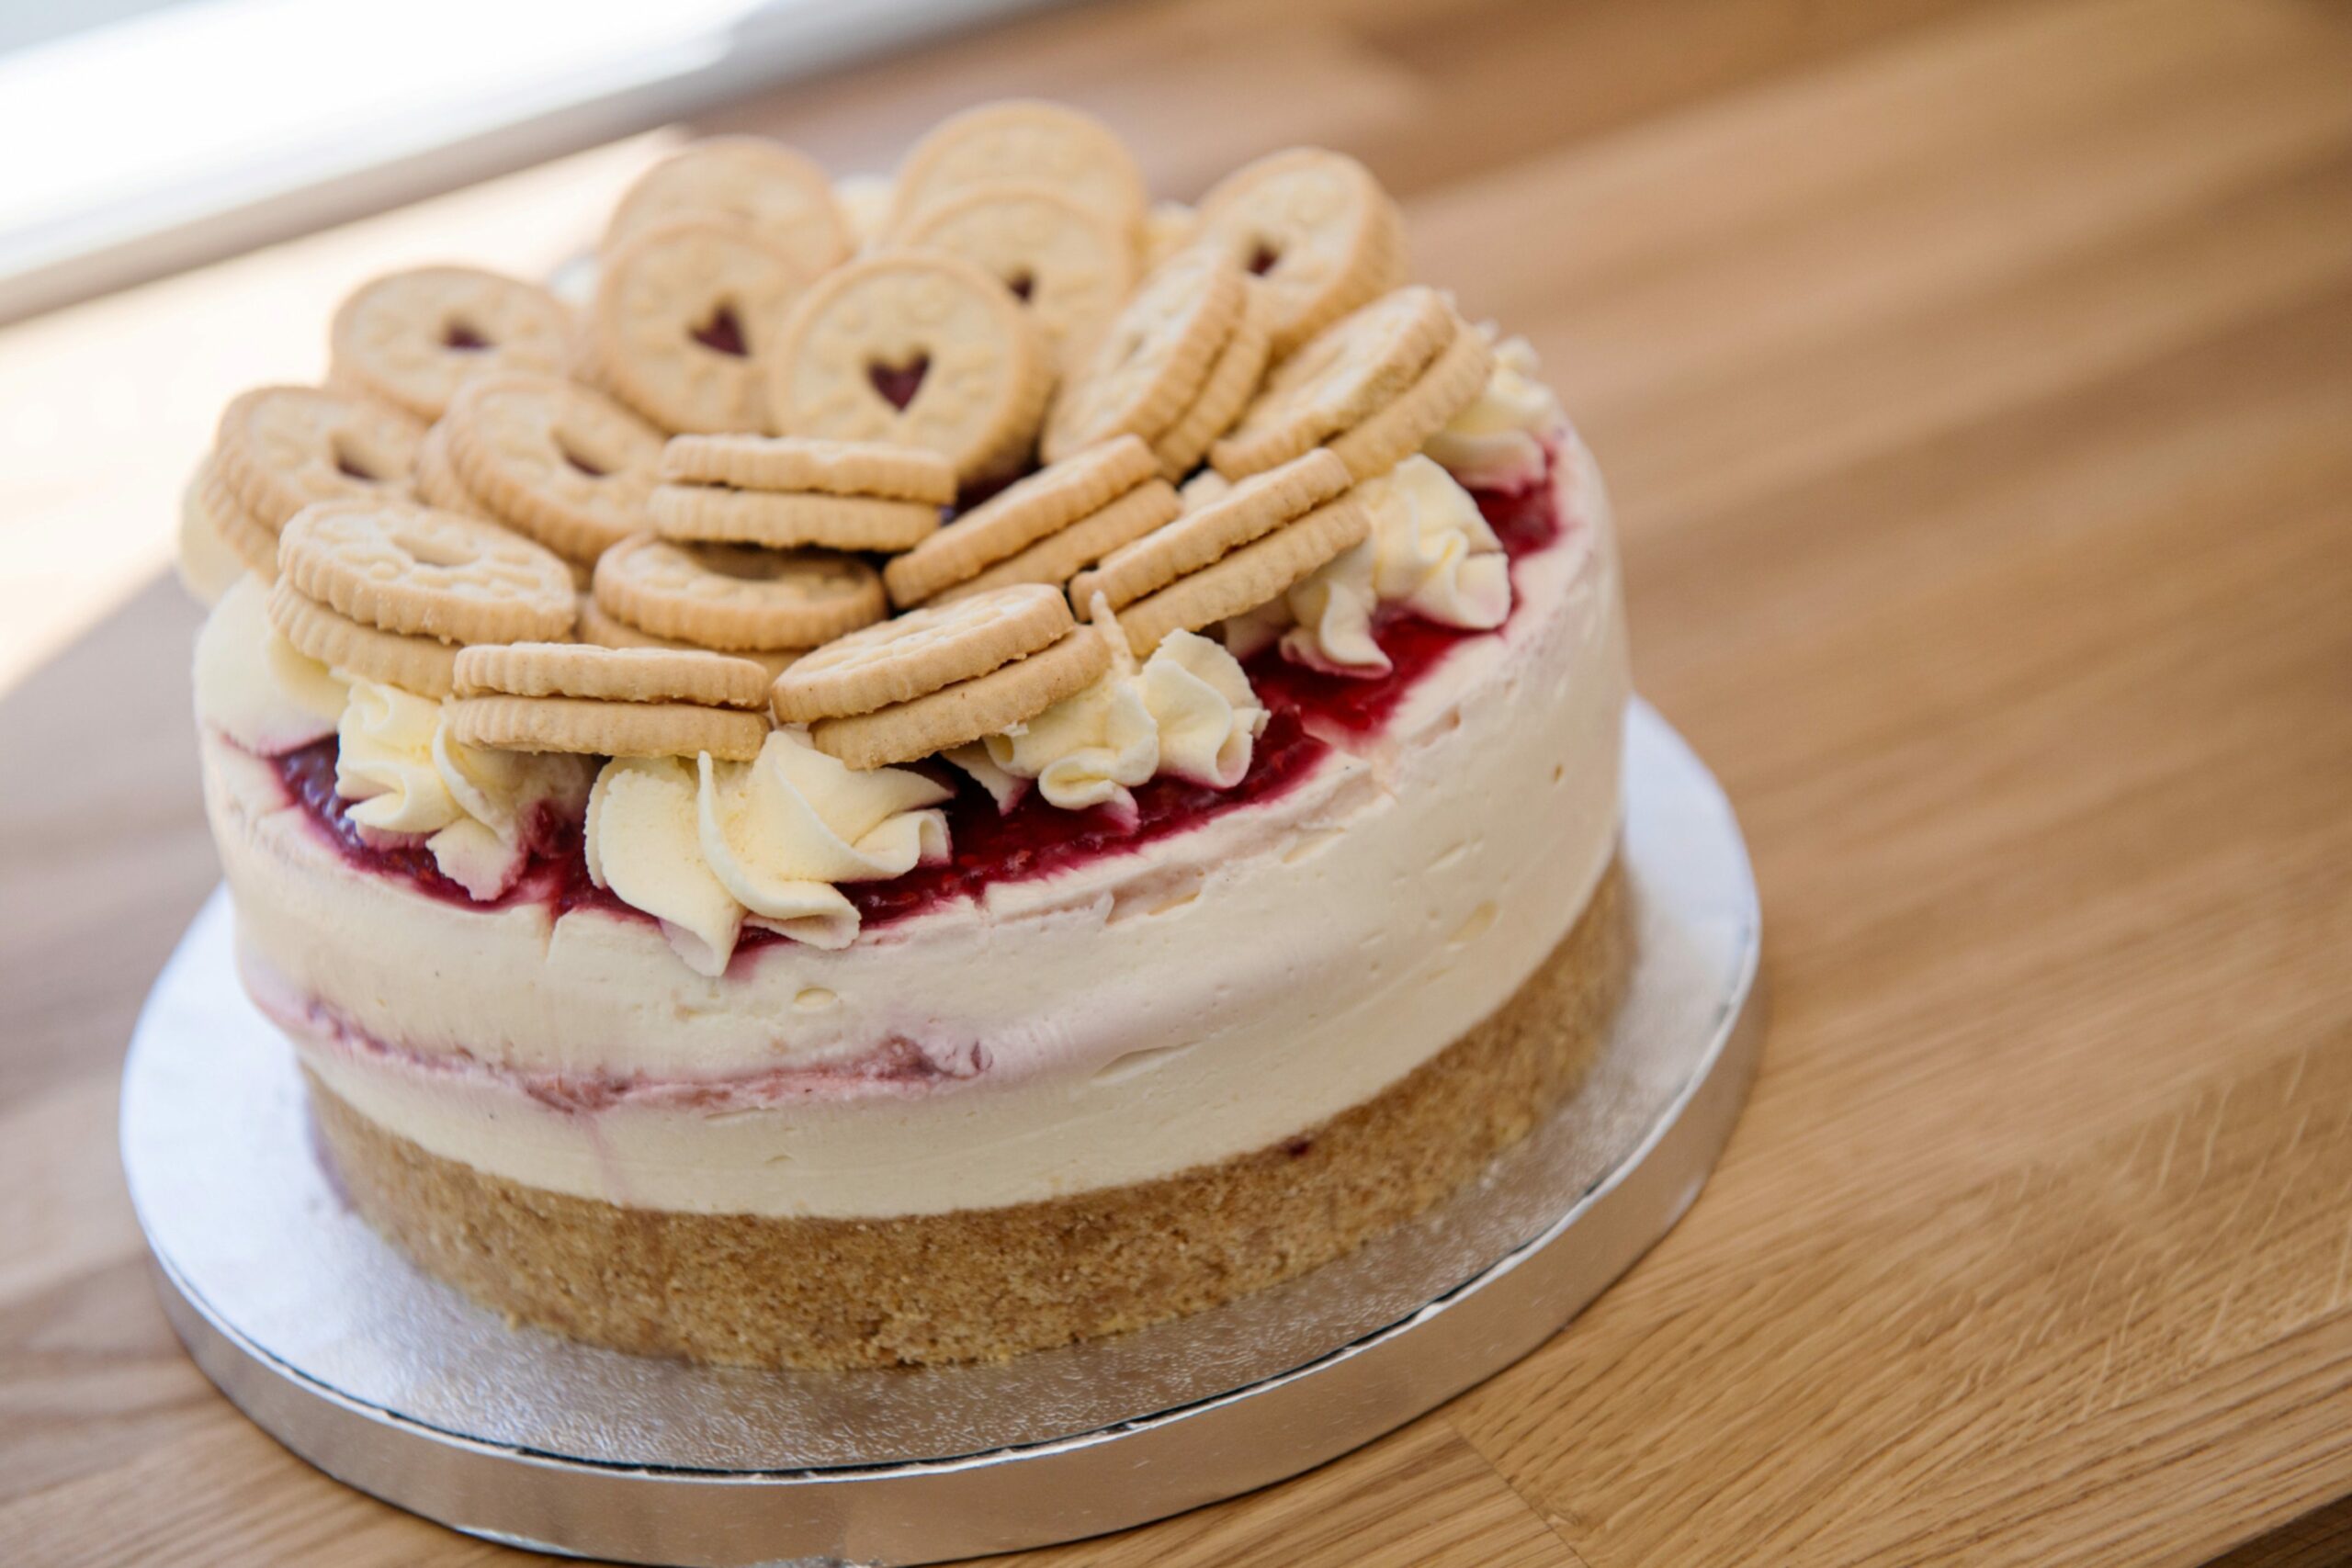 A Jammie Dodger cheesecake from Little Molly's Cheesecakes